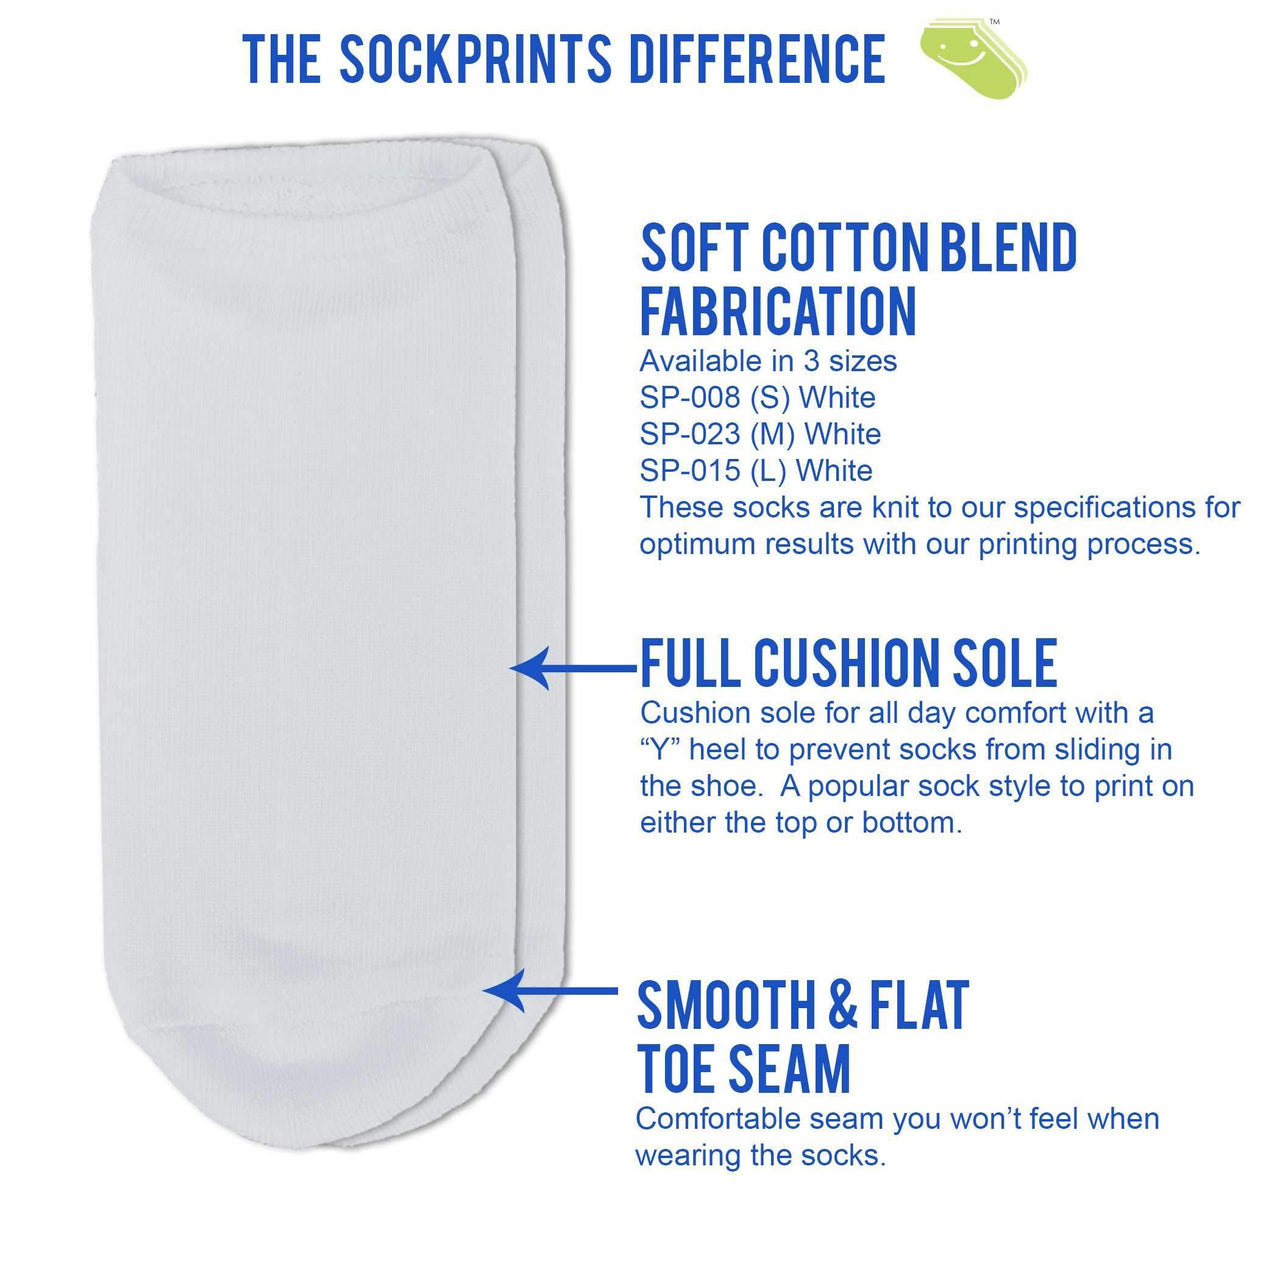 Soft cotton blend fabrication and full cushion sole with smooth and flat toe seam on these white no show socks.